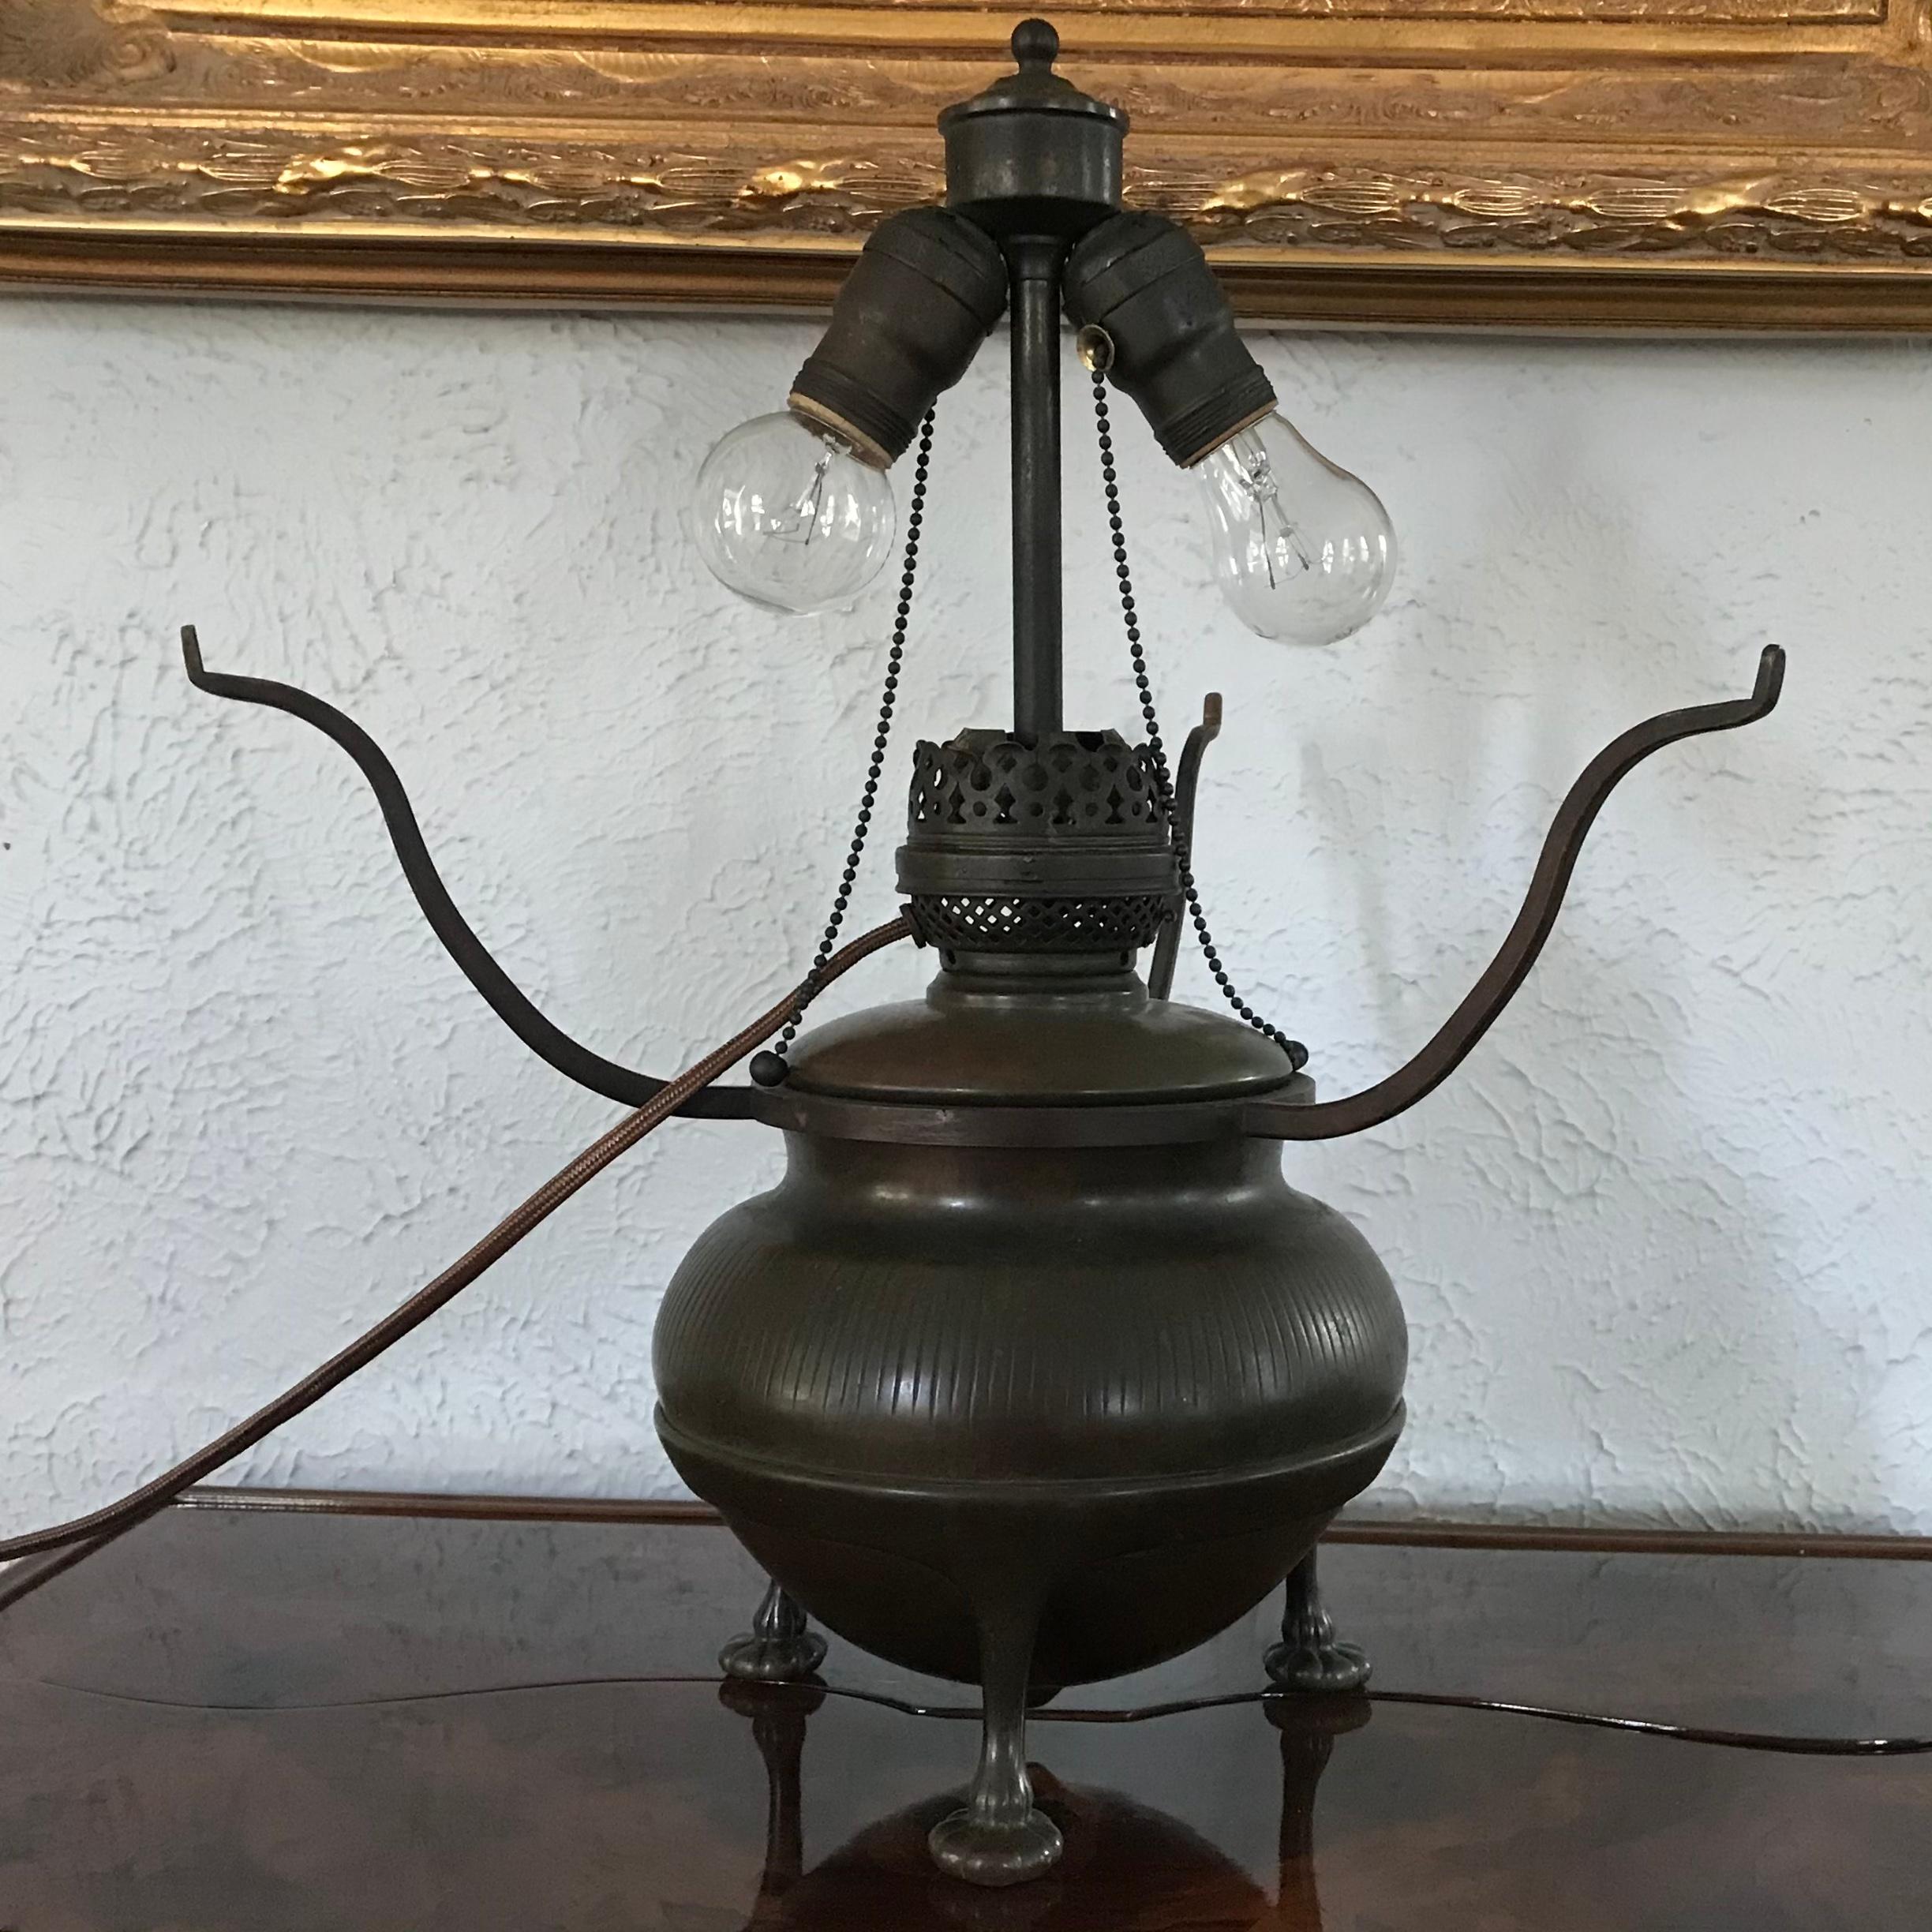 A three pawed bronze acorn oil lamp base with a wonderful brown and red-green patina has need electrified.

Marks to base: TIFFANY STUDIOS, NEW YORK, 25779, (TGD Co. cipher).